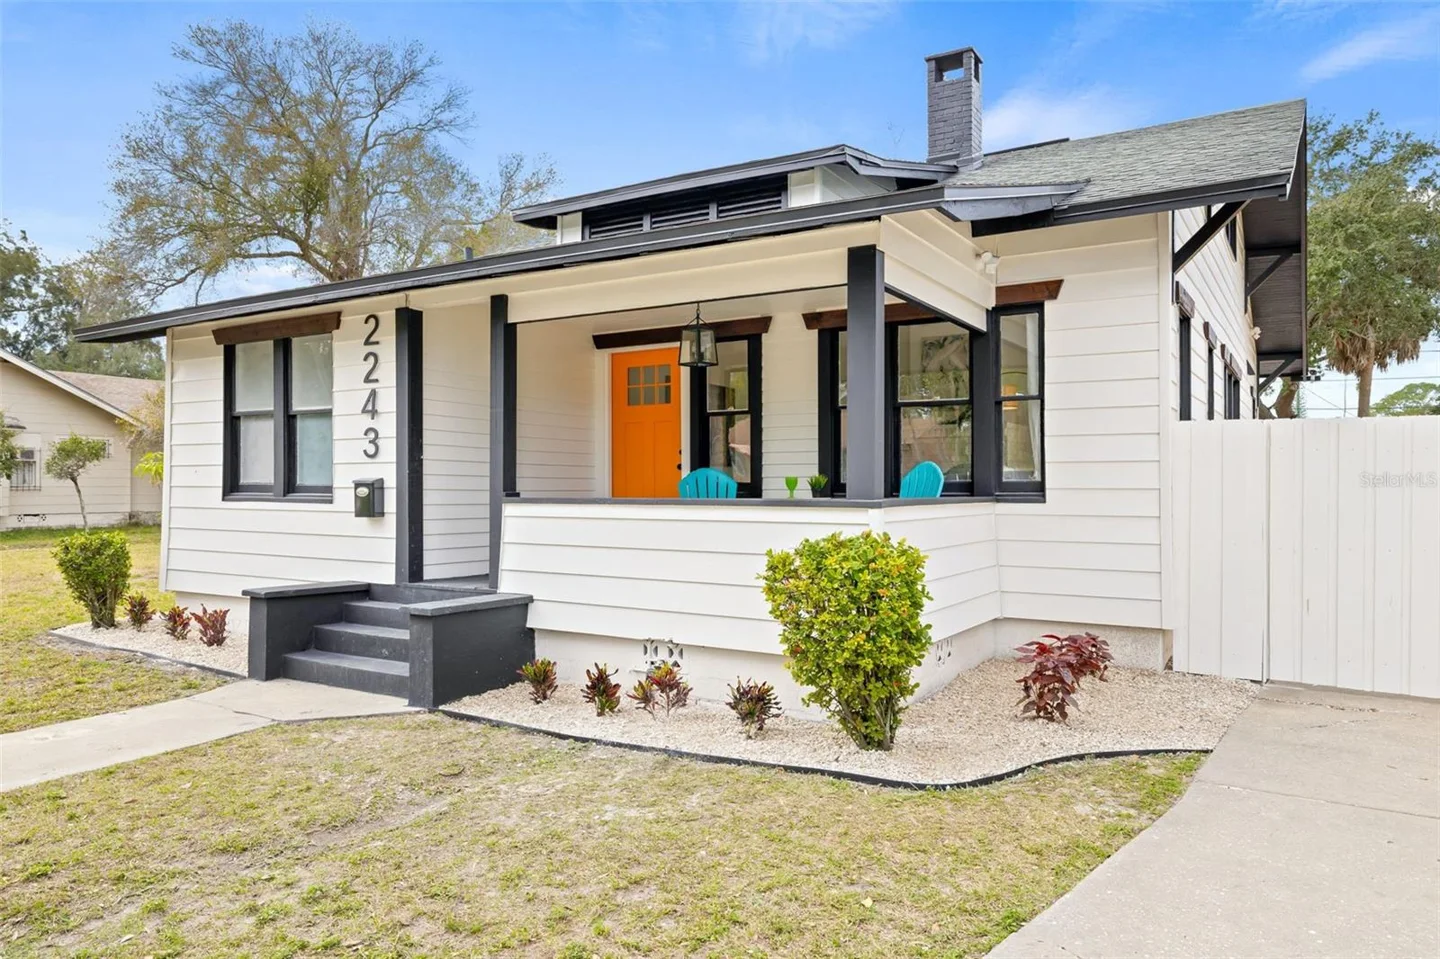 CHIC, RENOVATED BUNGALOW IN ST PETE